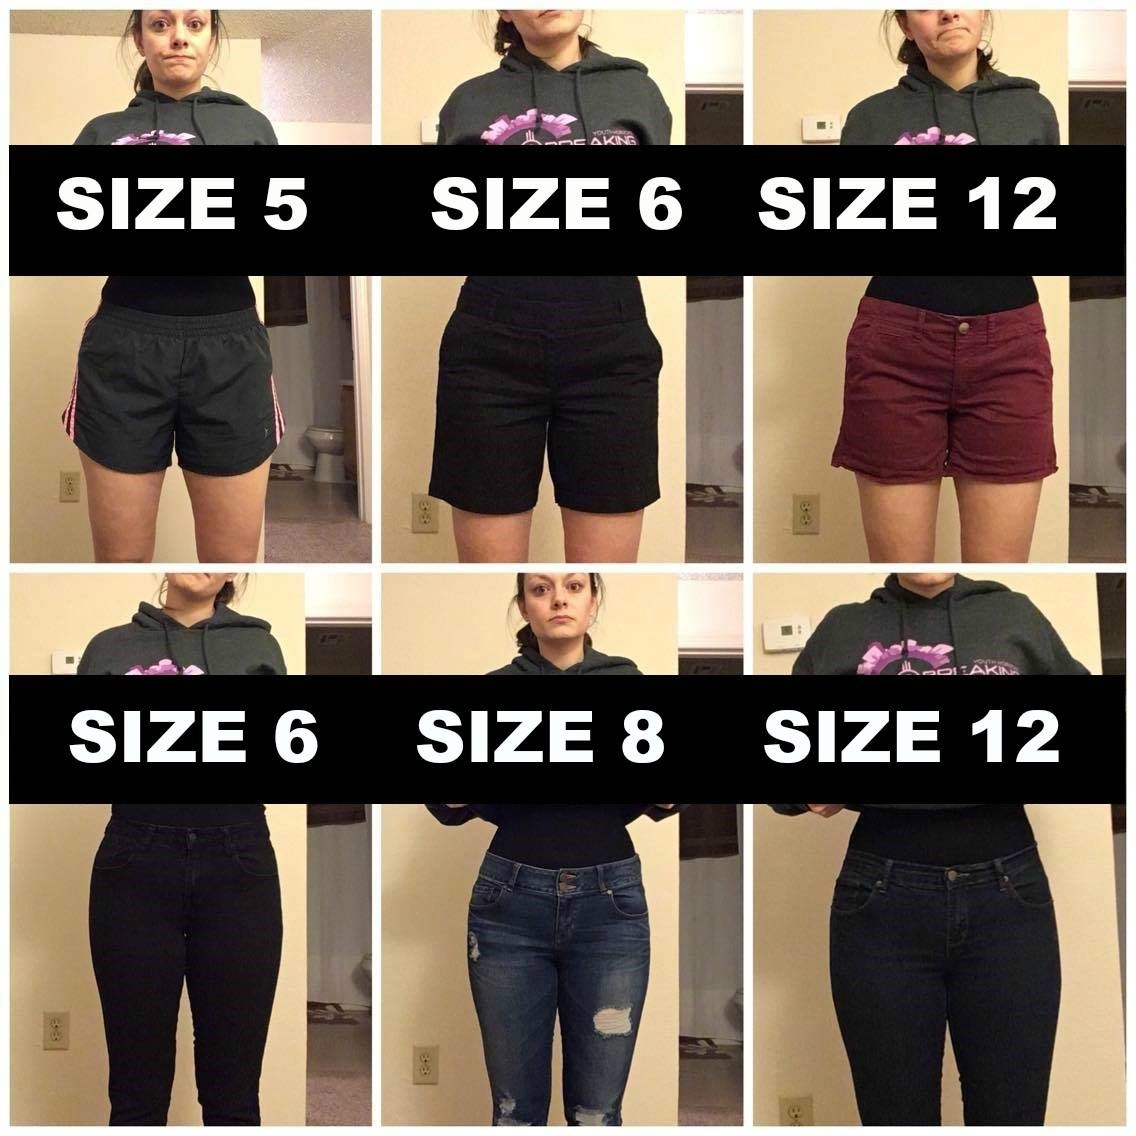 This Facebook Post Proves Just How Ridiculous Women's Clothing Sizes Are